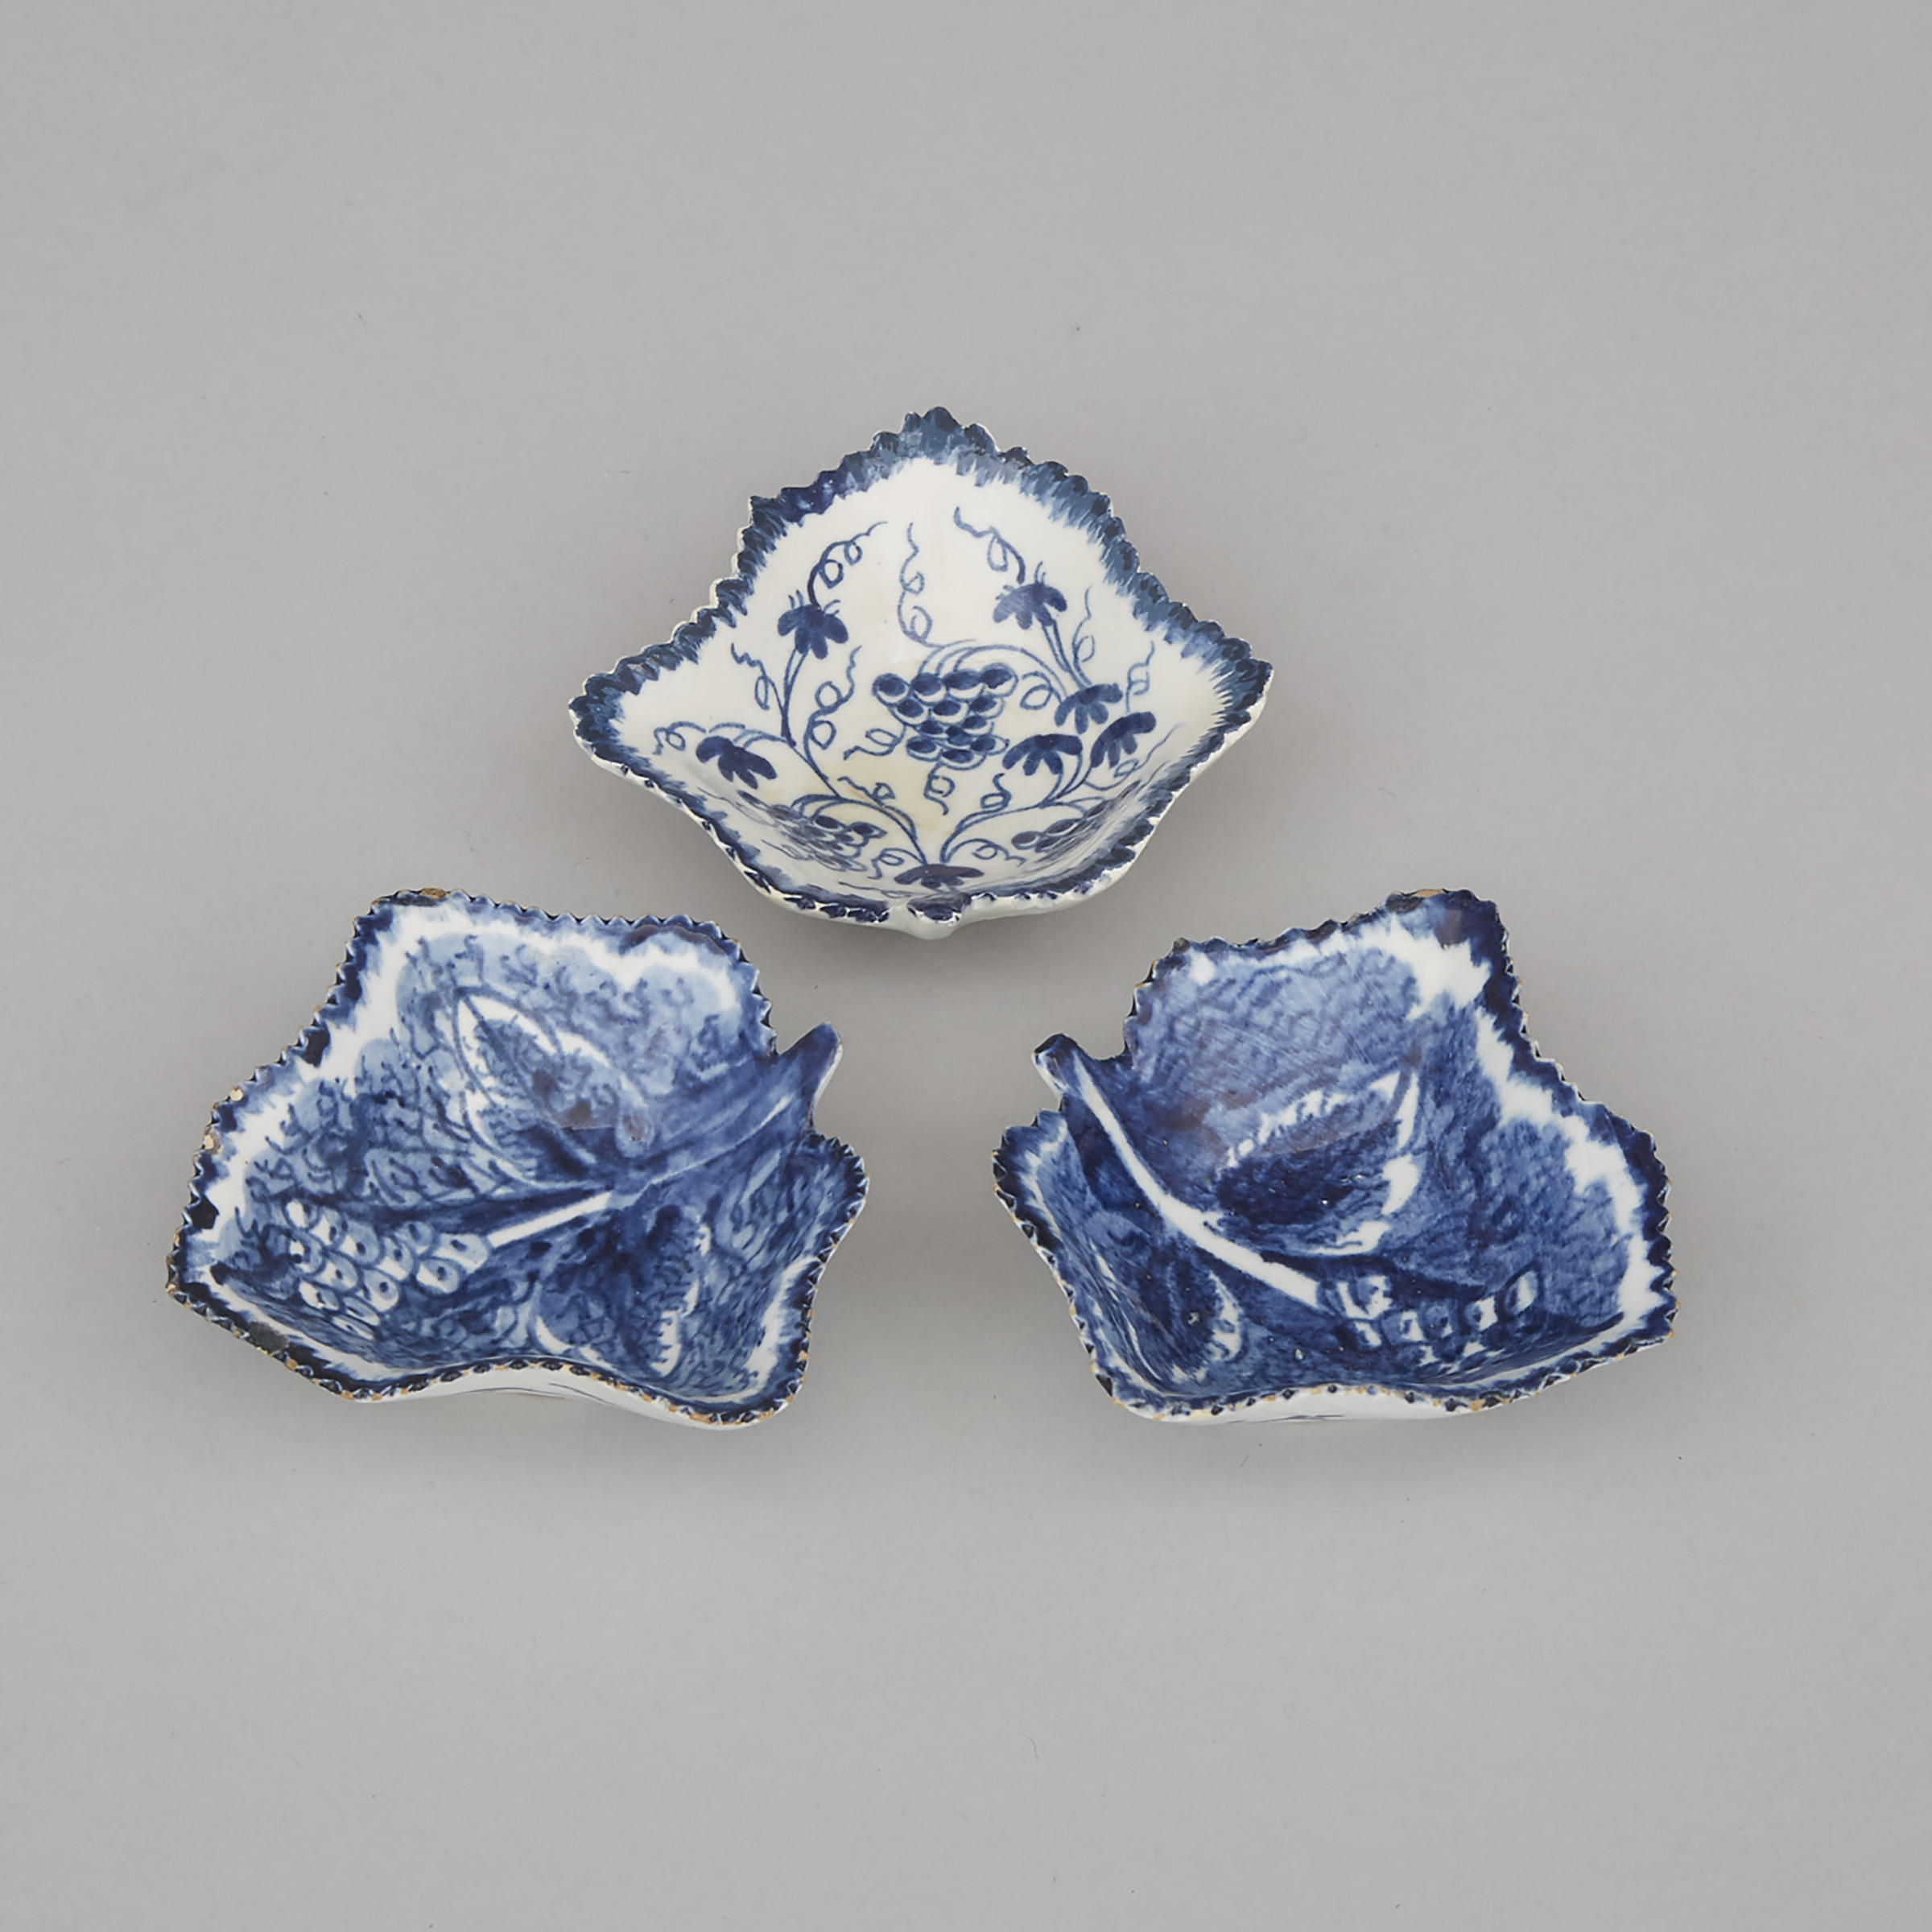 Three Bow Blue and White Pickle Leaf Dishes, c.1765